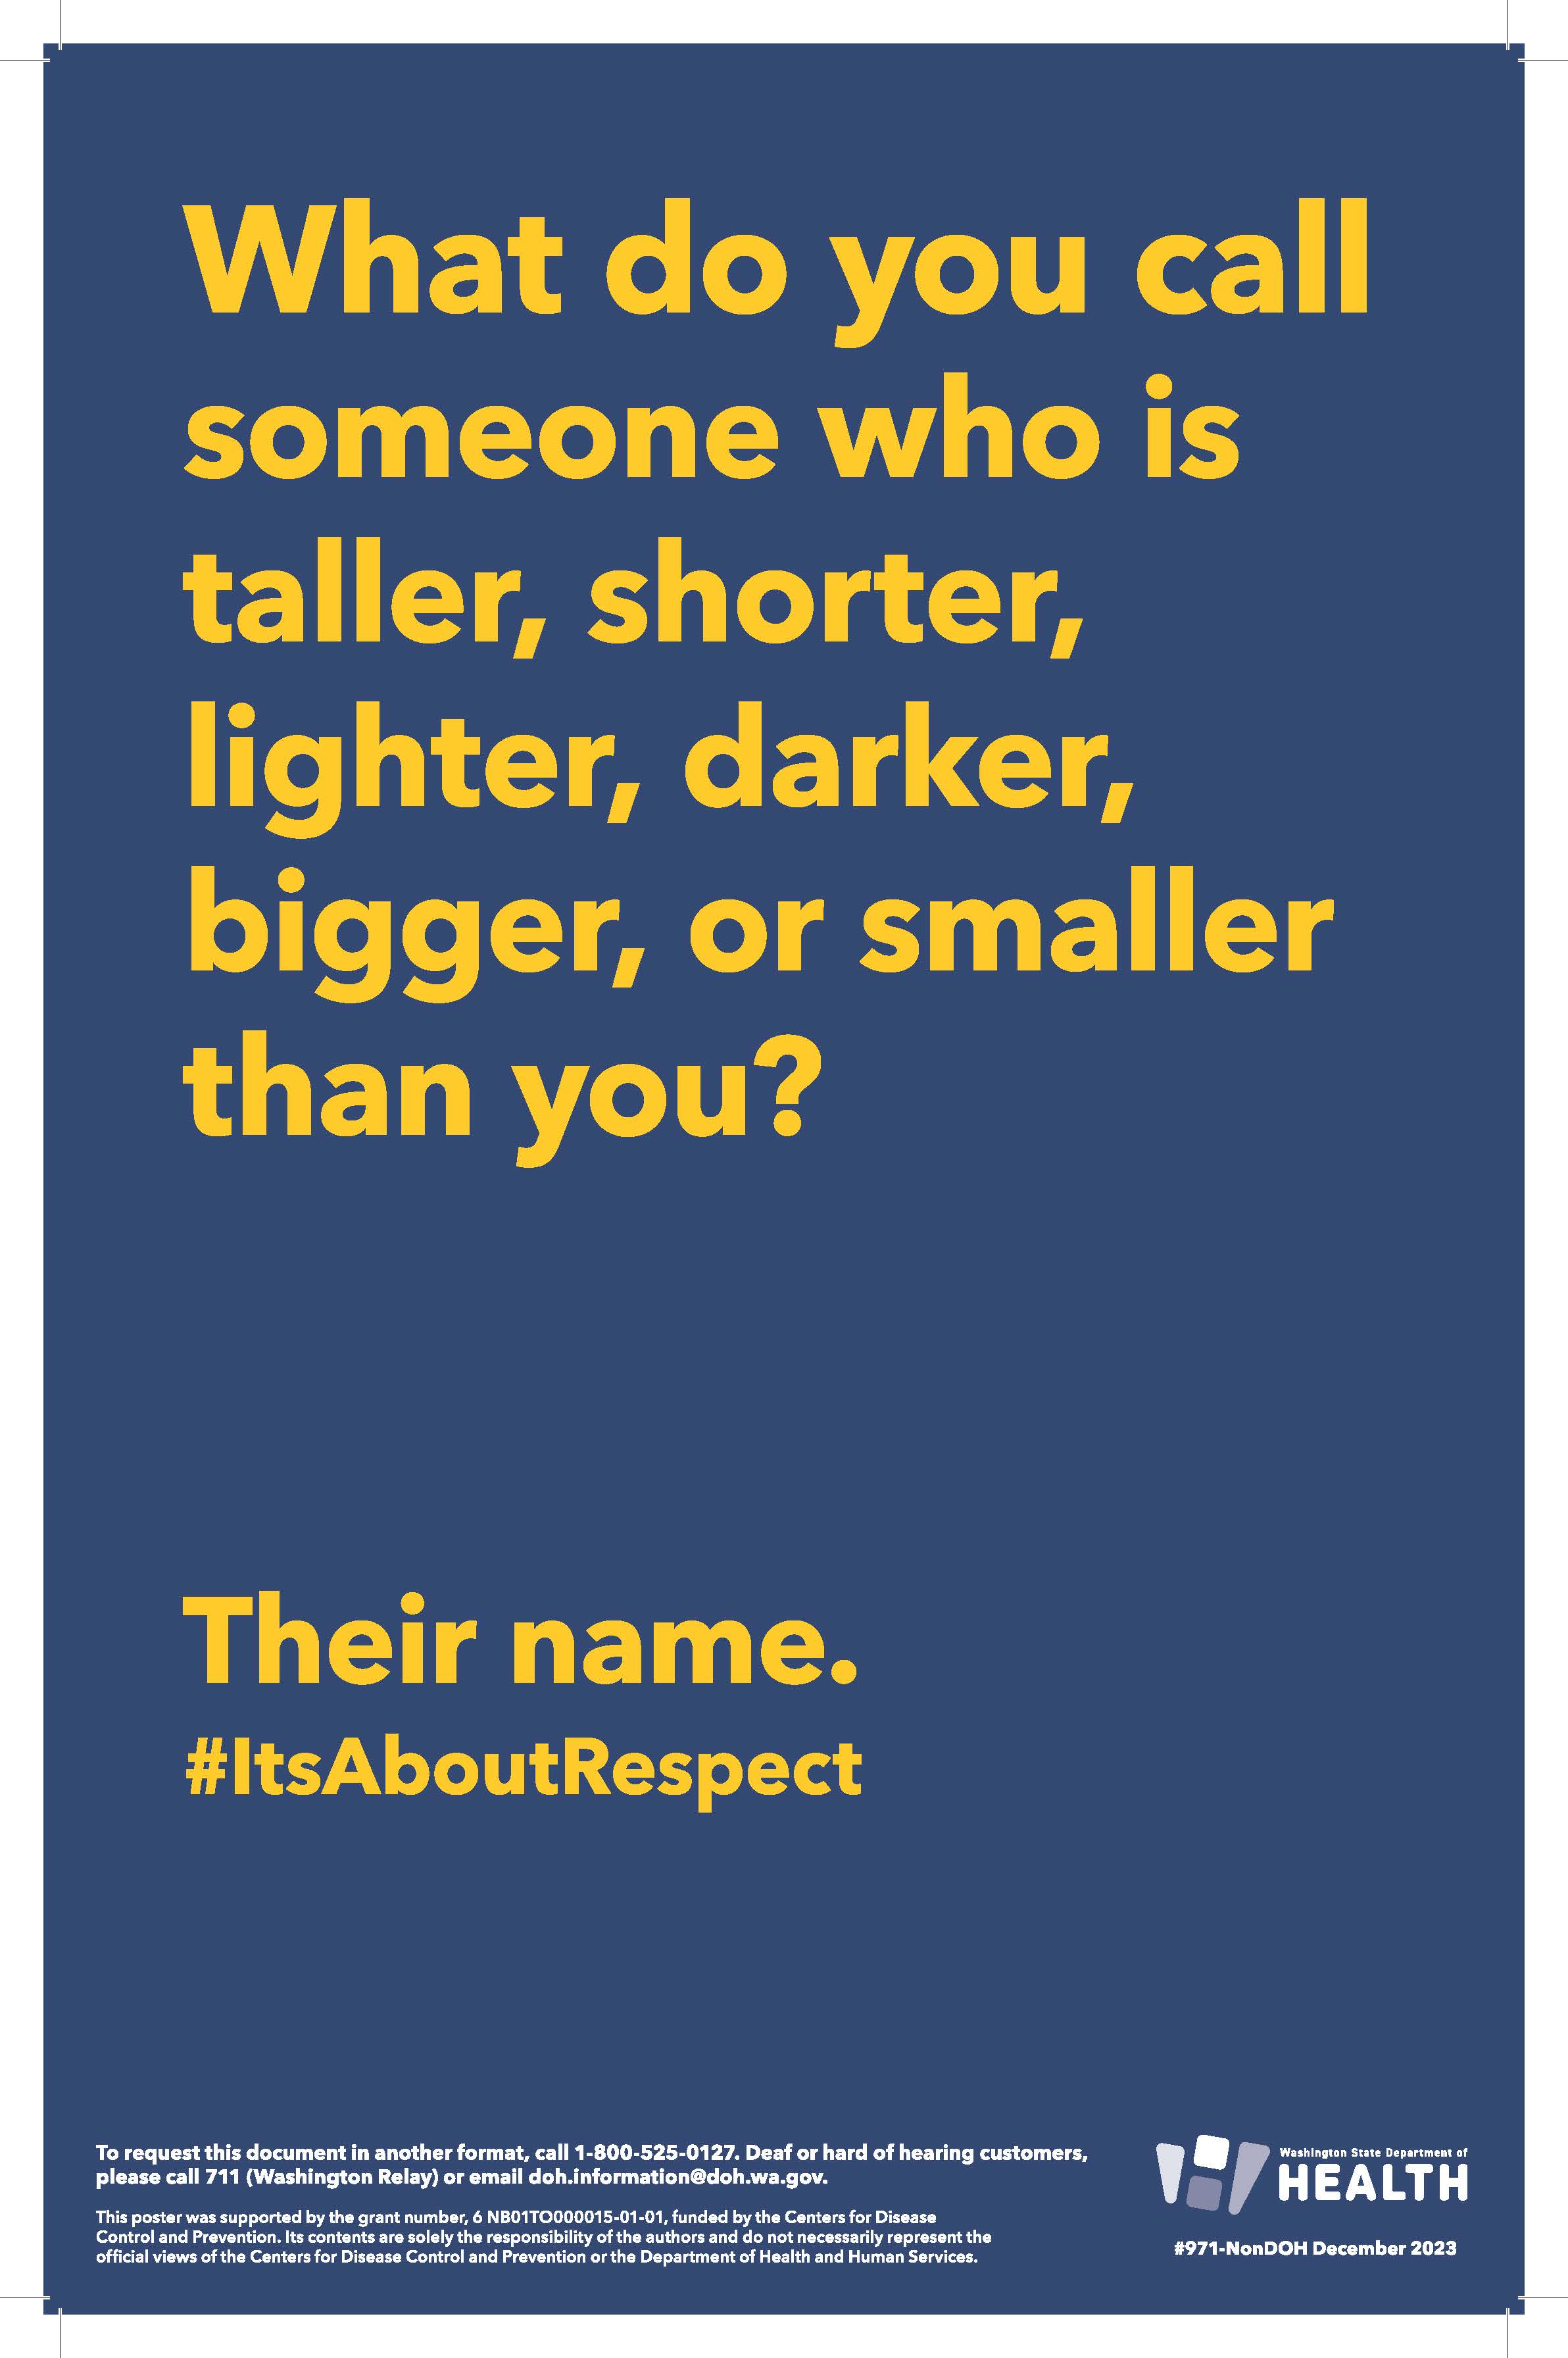 This poster image says “Touching someone without permission is way beyond not cool. More like epic fail. Think before you act.” It features a cat in a plumed hat and the hashtag “it's about respect”.